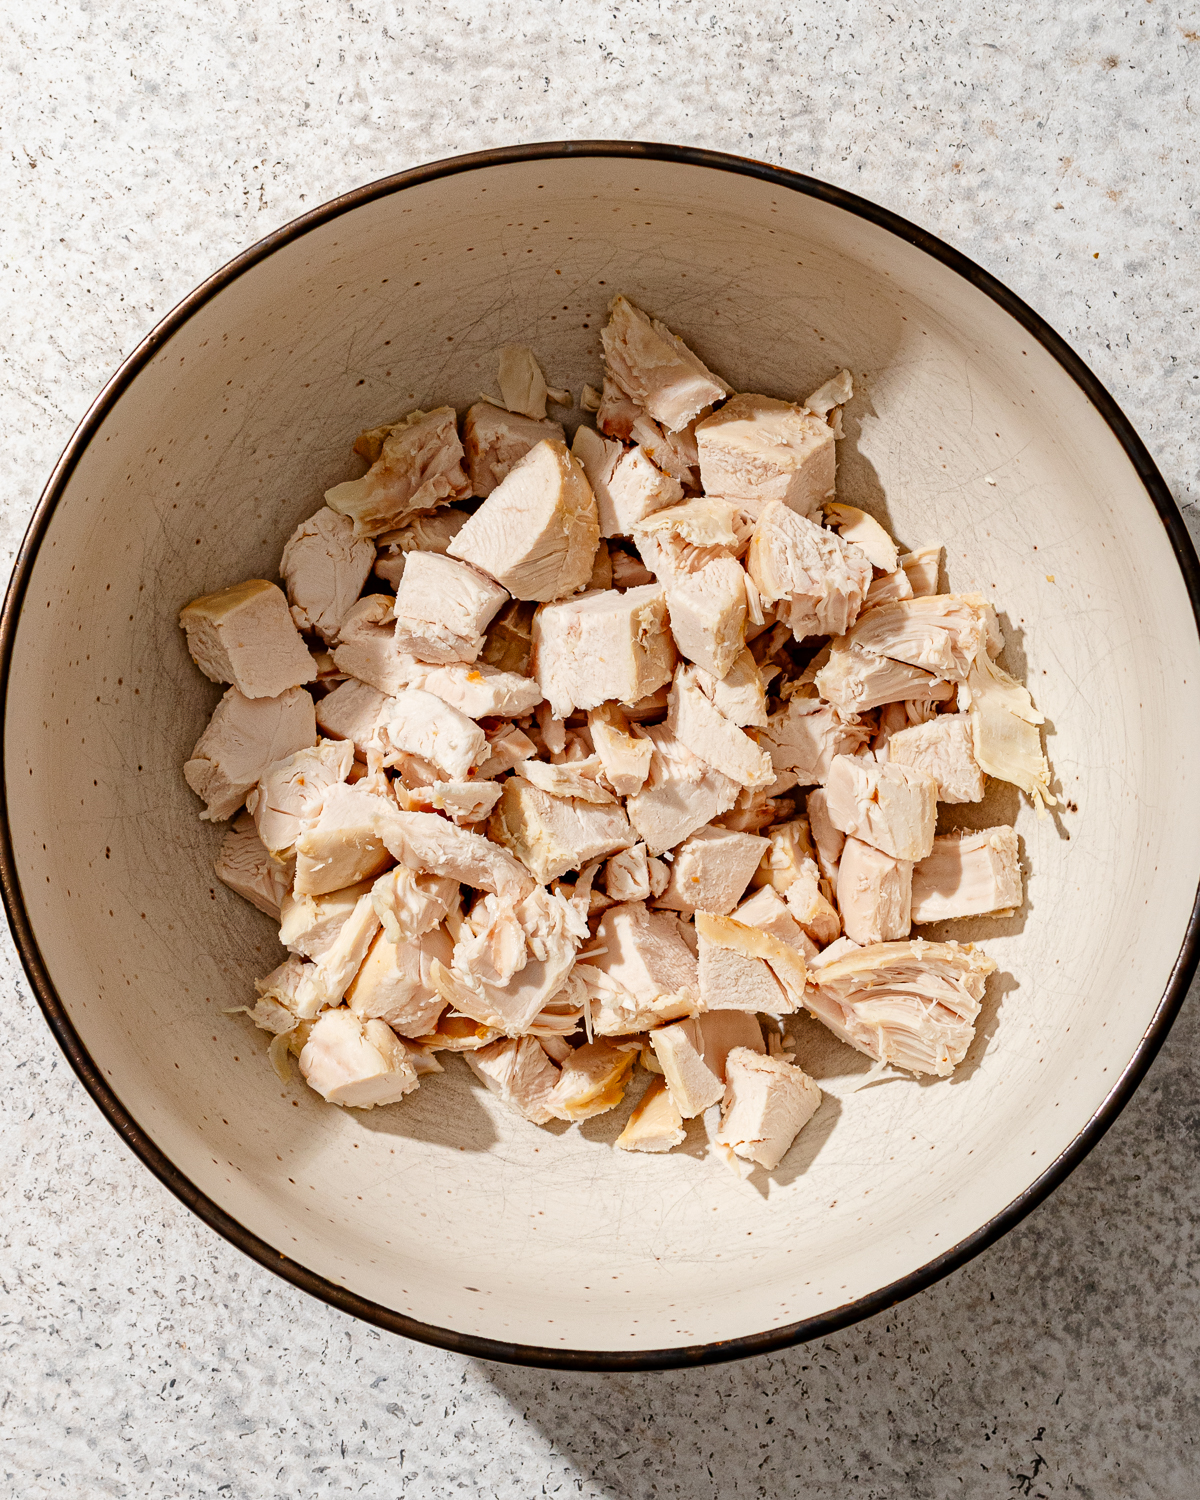 Cooked chicken cut up in a bowl for high protein chicken salad.